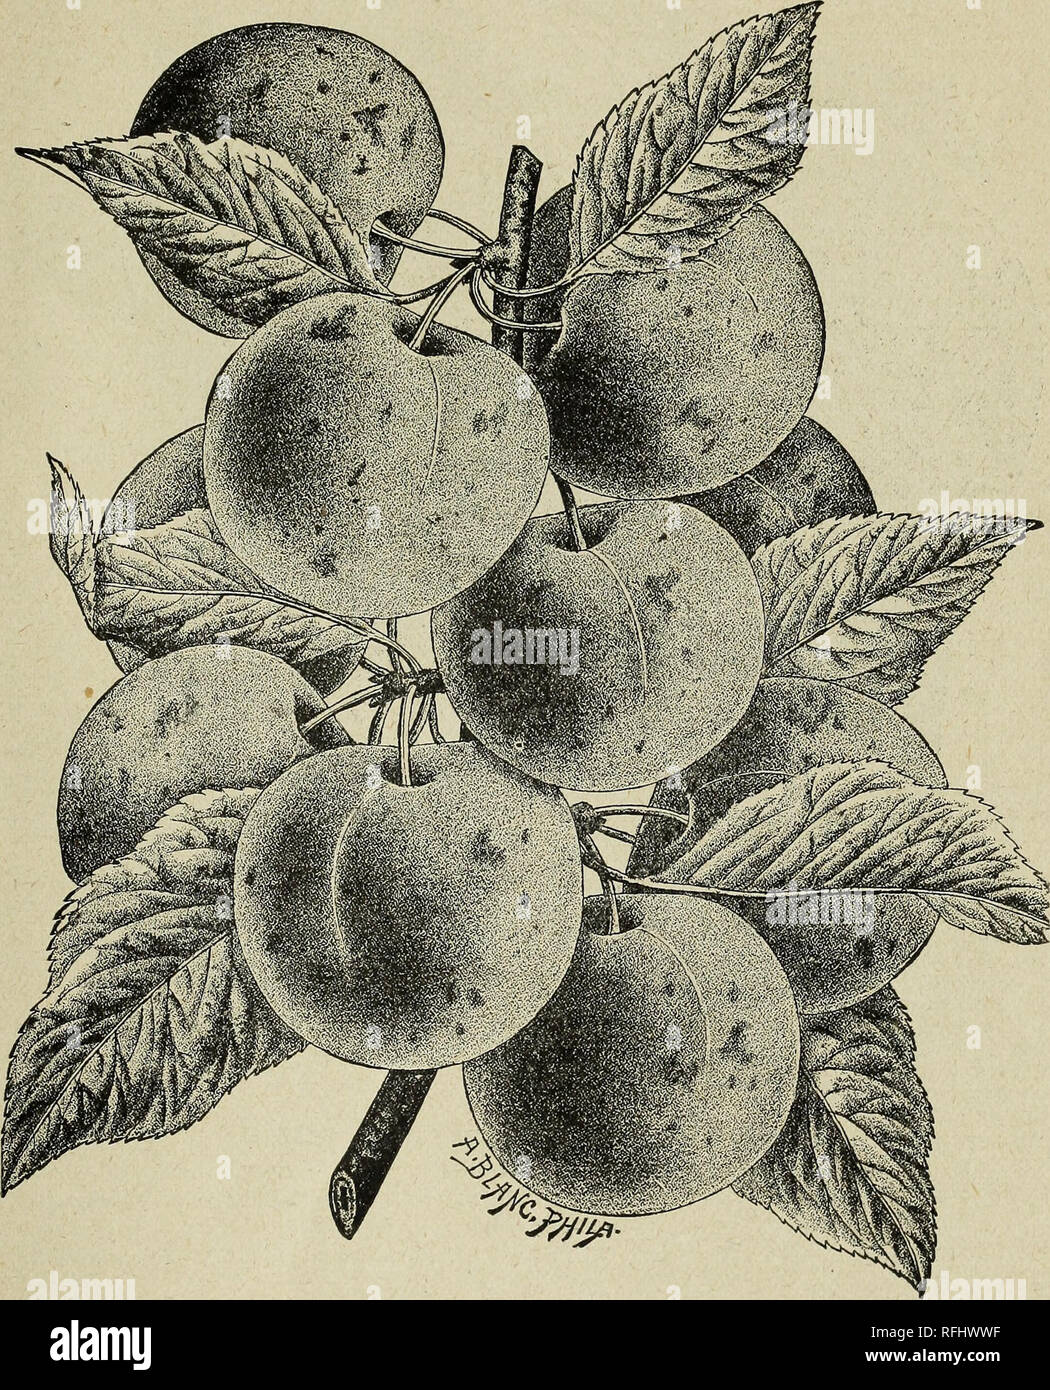 . Descriptive catalogue of fruit and ornamental trees, shrubs, vines and plants. Nurseries (Horticulture) Maryland Baltimore Catalogs; Fruit trees Seedlings Catalogs; Fruit Catalogs; Trees Seedlings Catalogs; Shrubs Catalogs; Plants, Ornamental Catalogs. Descriptive Catalogue. 45. Wild Goose Plum. Washington. (Bolmar's.) Very large ; skin yellowish green, often with a pale red blush ; flesh yellowish, firm, very sweet and luscious, separating freely from the stone. There is perhaps, not another plum that stands so high in general estimation in this country as the Washington. Its great size, it Stock Photo